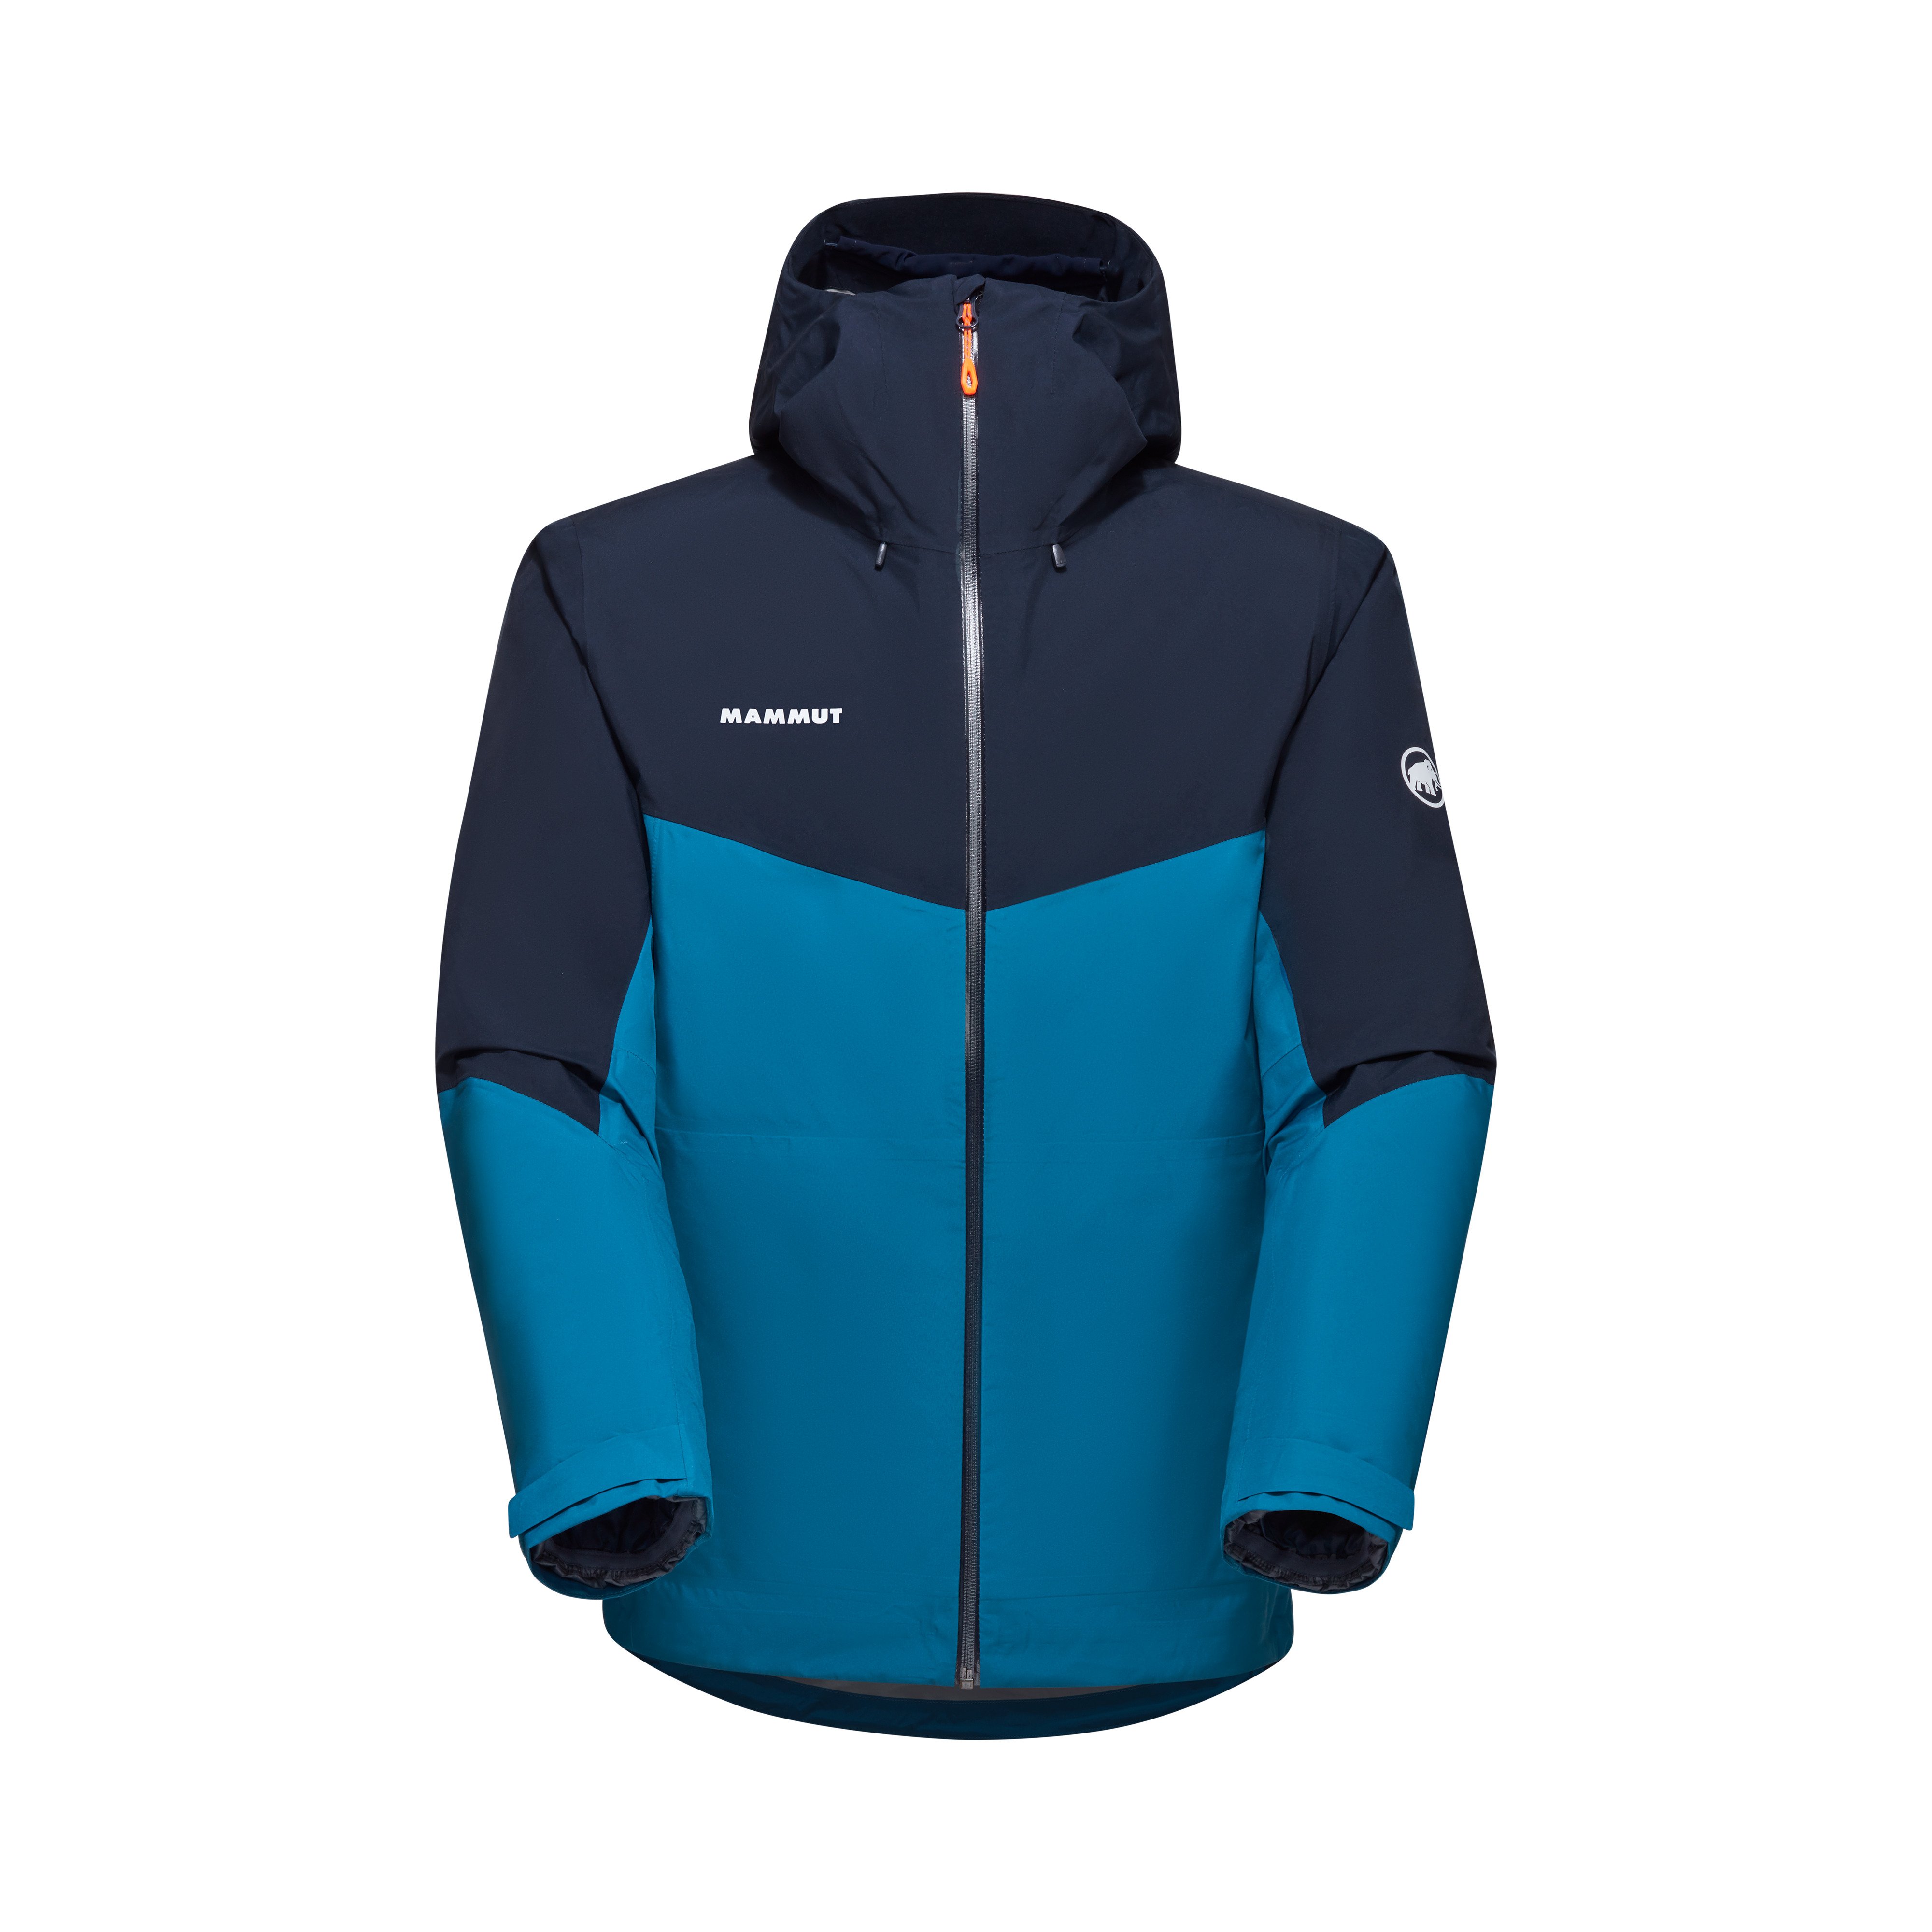 Convey 3 in 1 HS Hooded Jacket Men - deep ice-marine, S product image